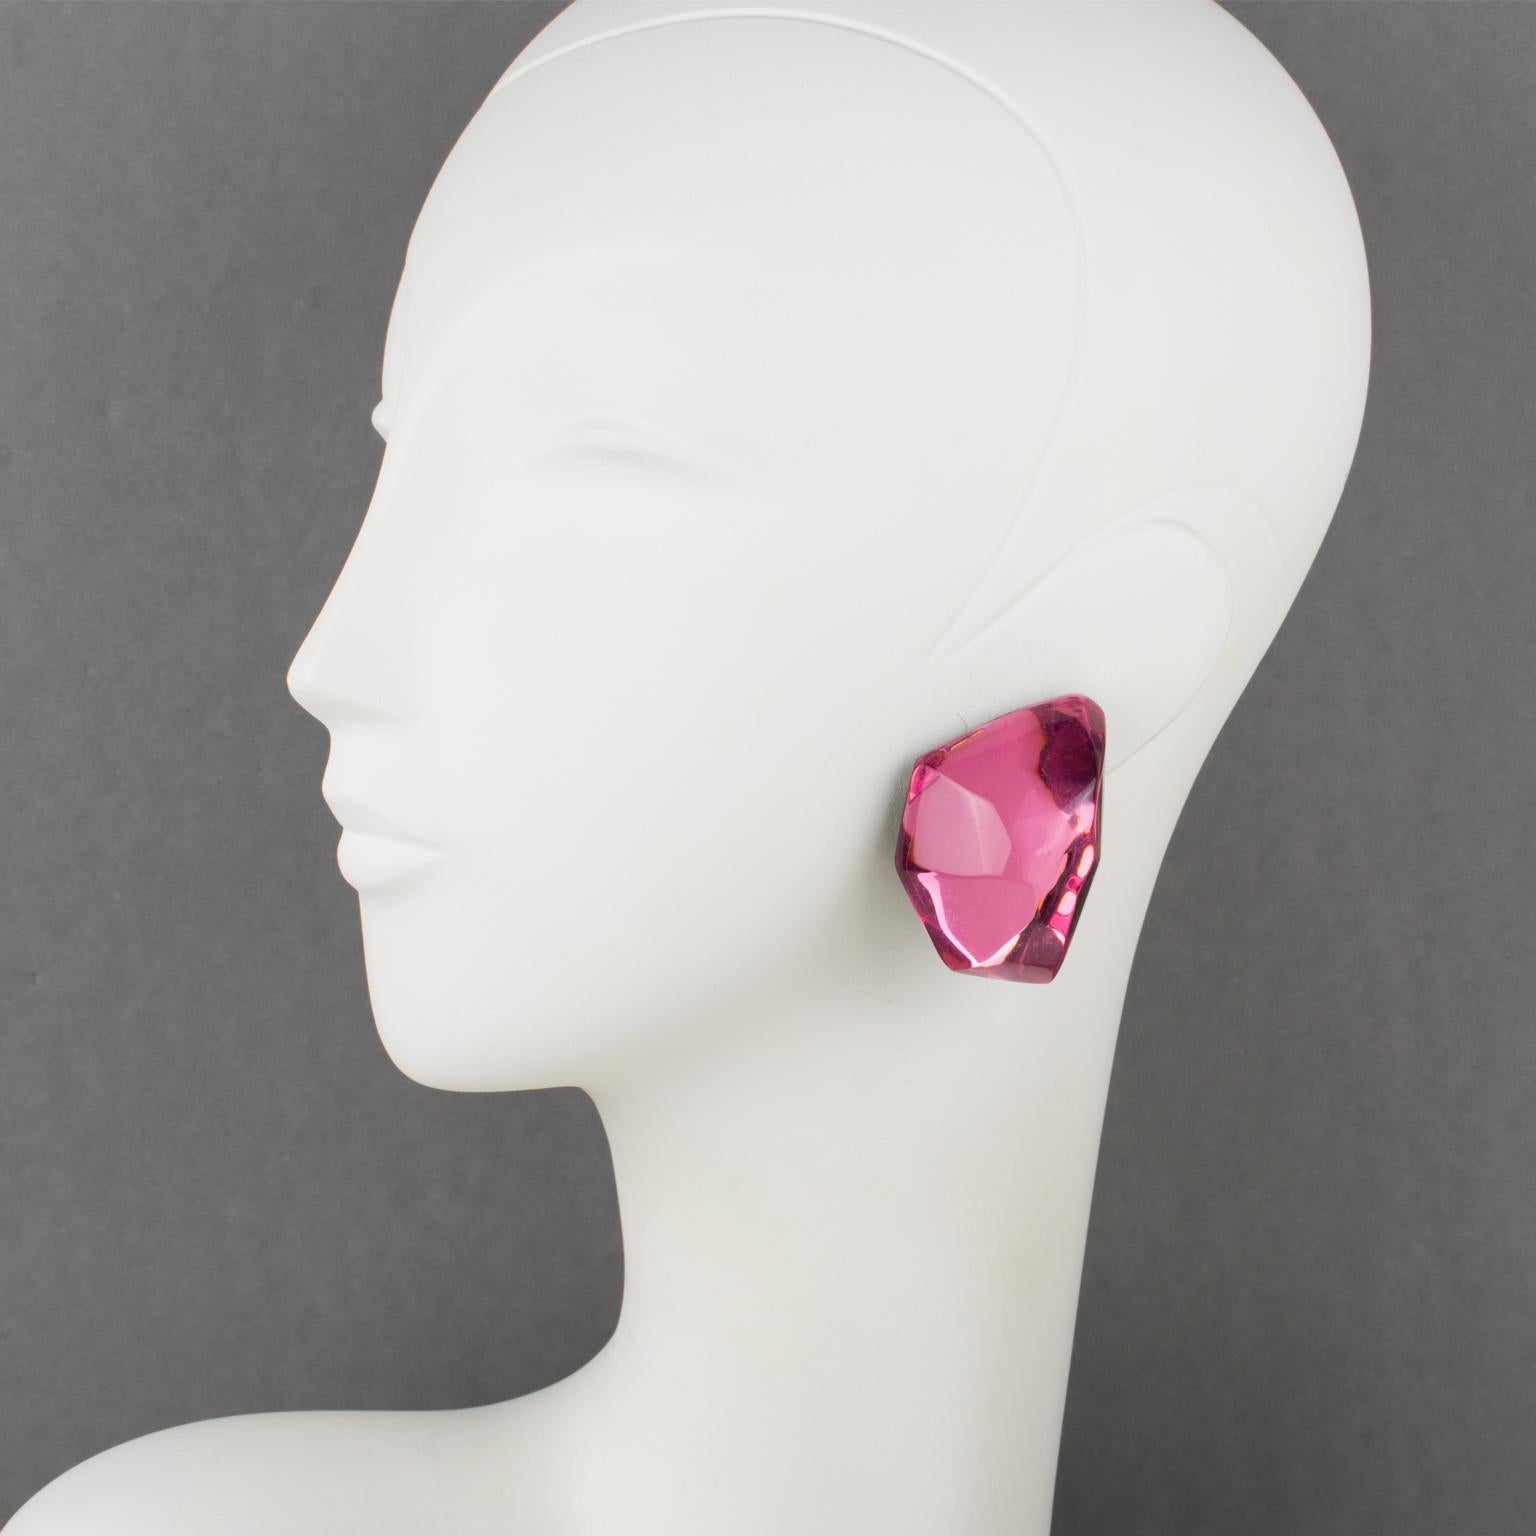 Harriet Bauknight designed these stunning Lucite clip-on earrings for Kaso. The pieces feature a dimensional giant ice cube with a hot pink mirror-textured pattern and beveling edges. 
The Kaso paper sticker was removed, but the gray background and